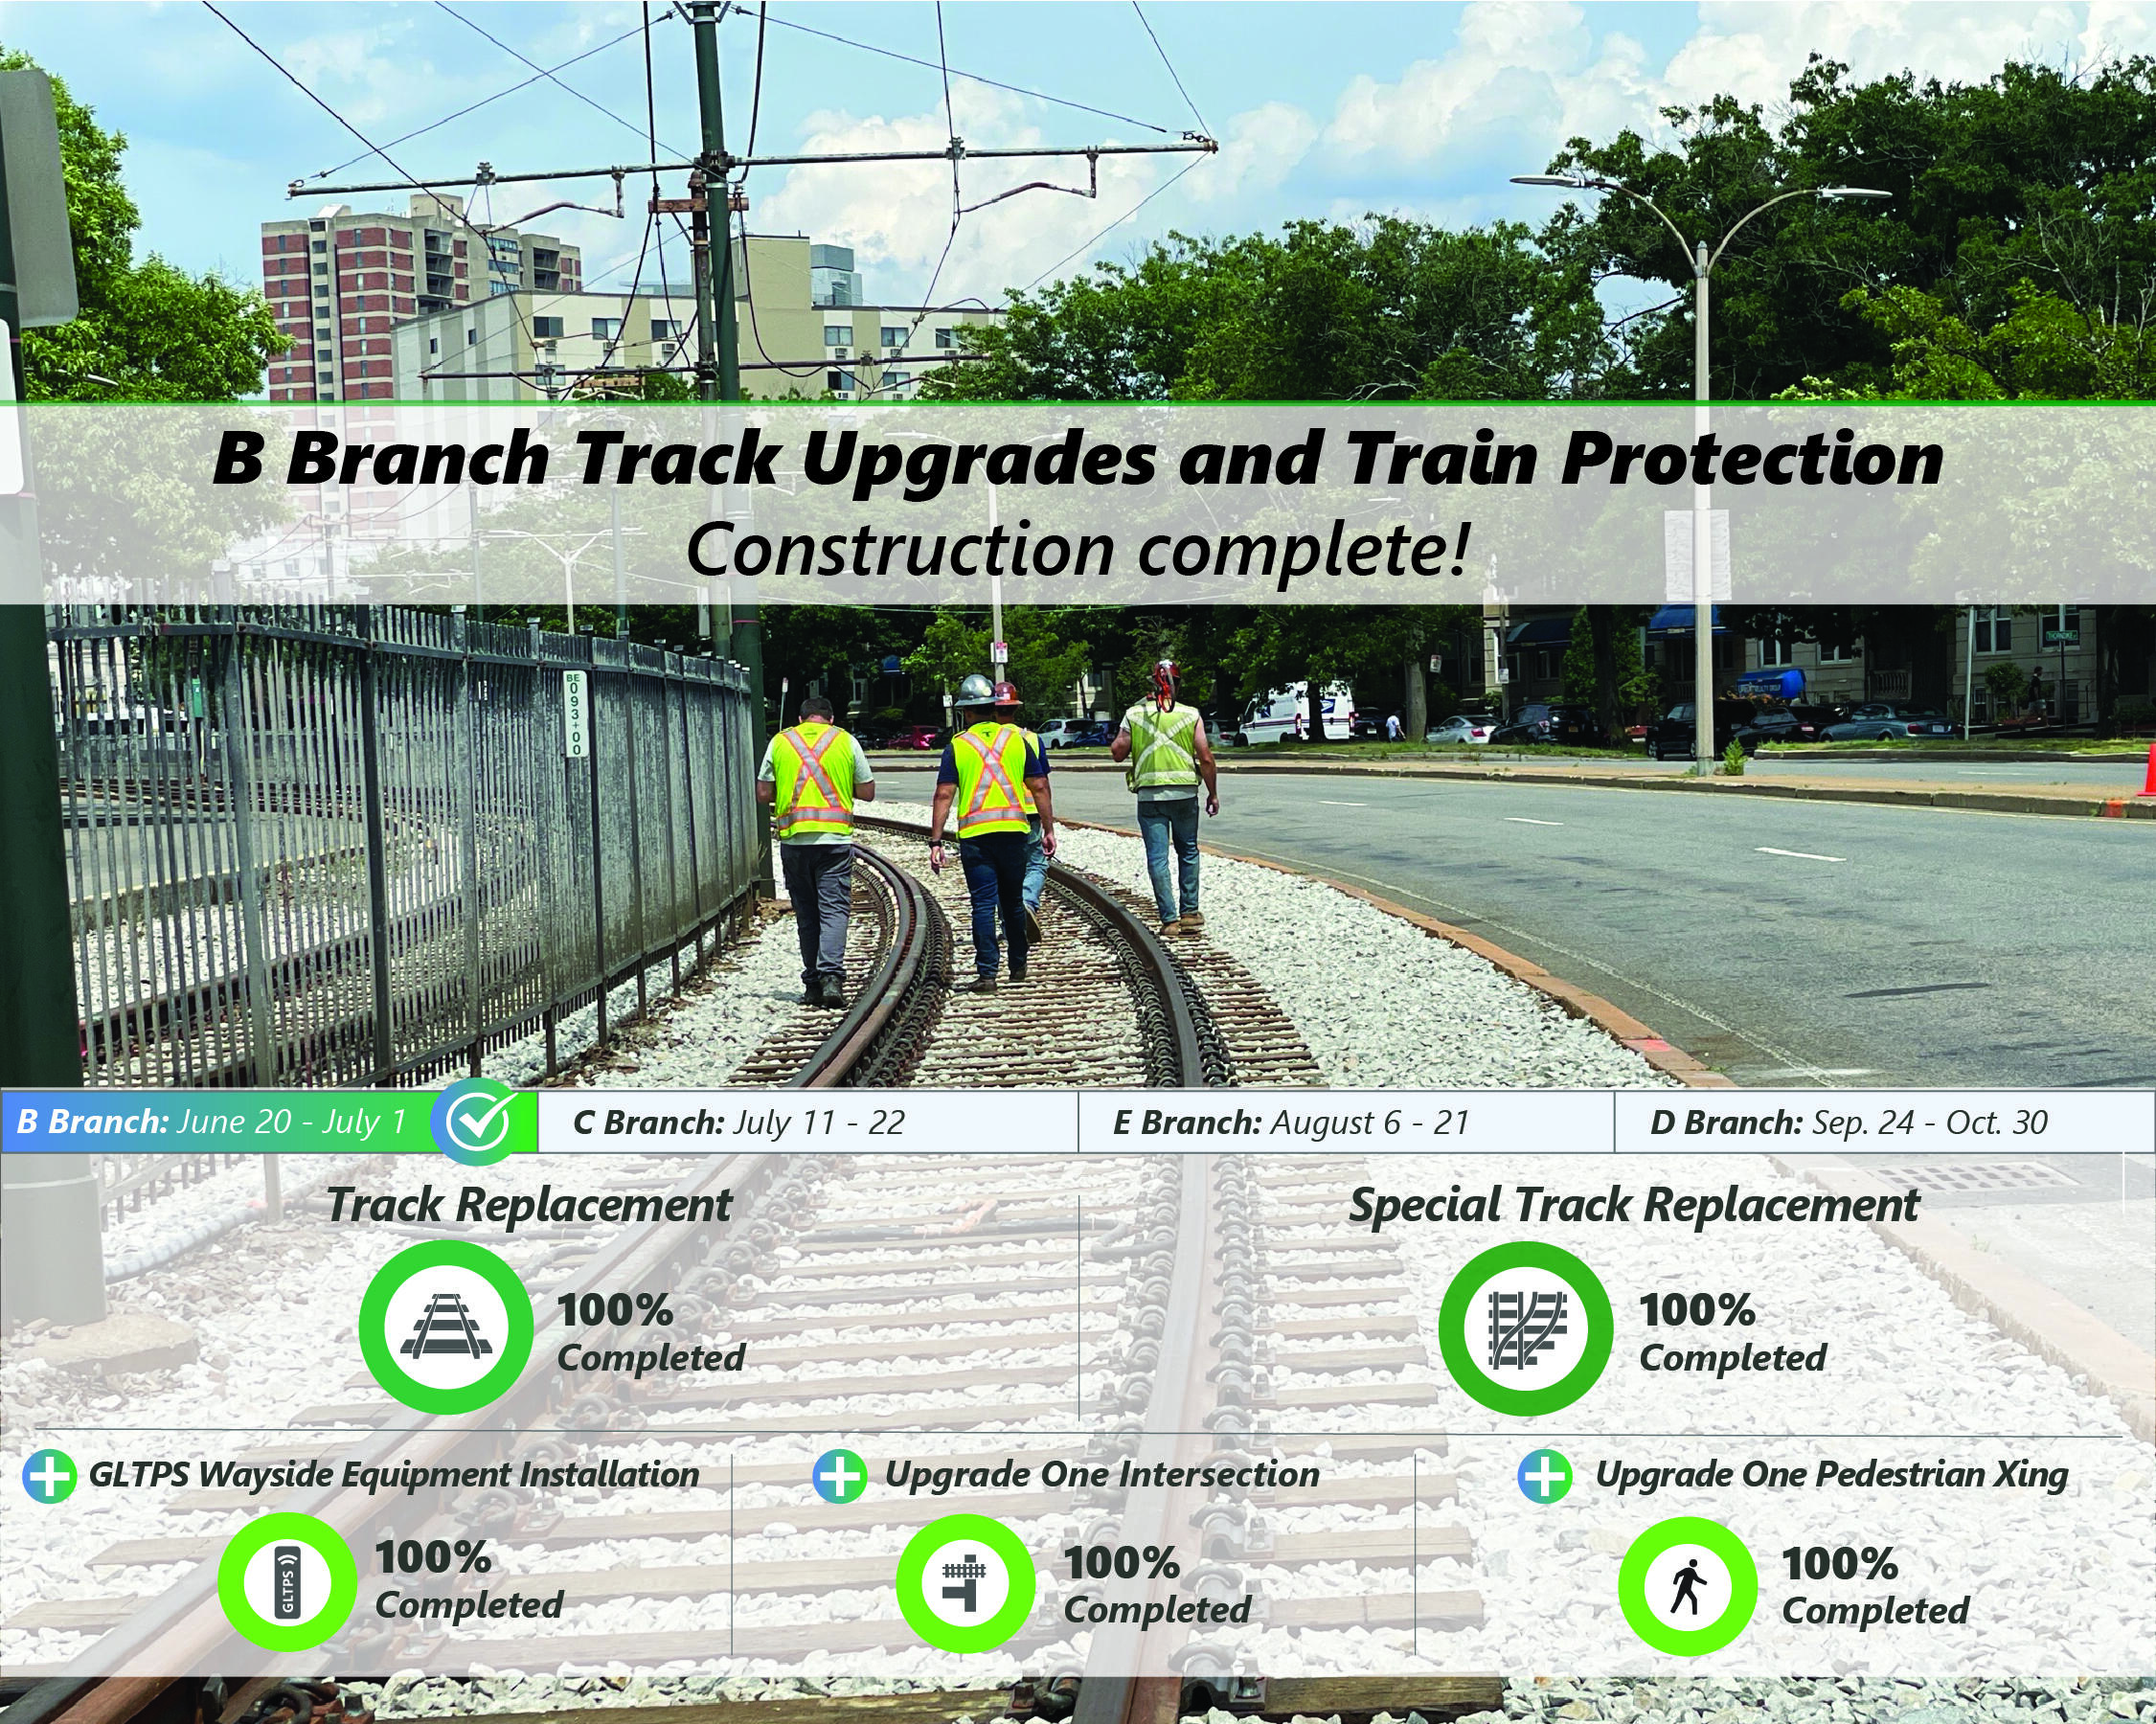 During this 12-day diversion in B Branch service, crews replaced 3,200 feet of track, four units of special track work, one vehicle intersection, one pedestrian crossing, and installed wayside equipment for GLTPS.